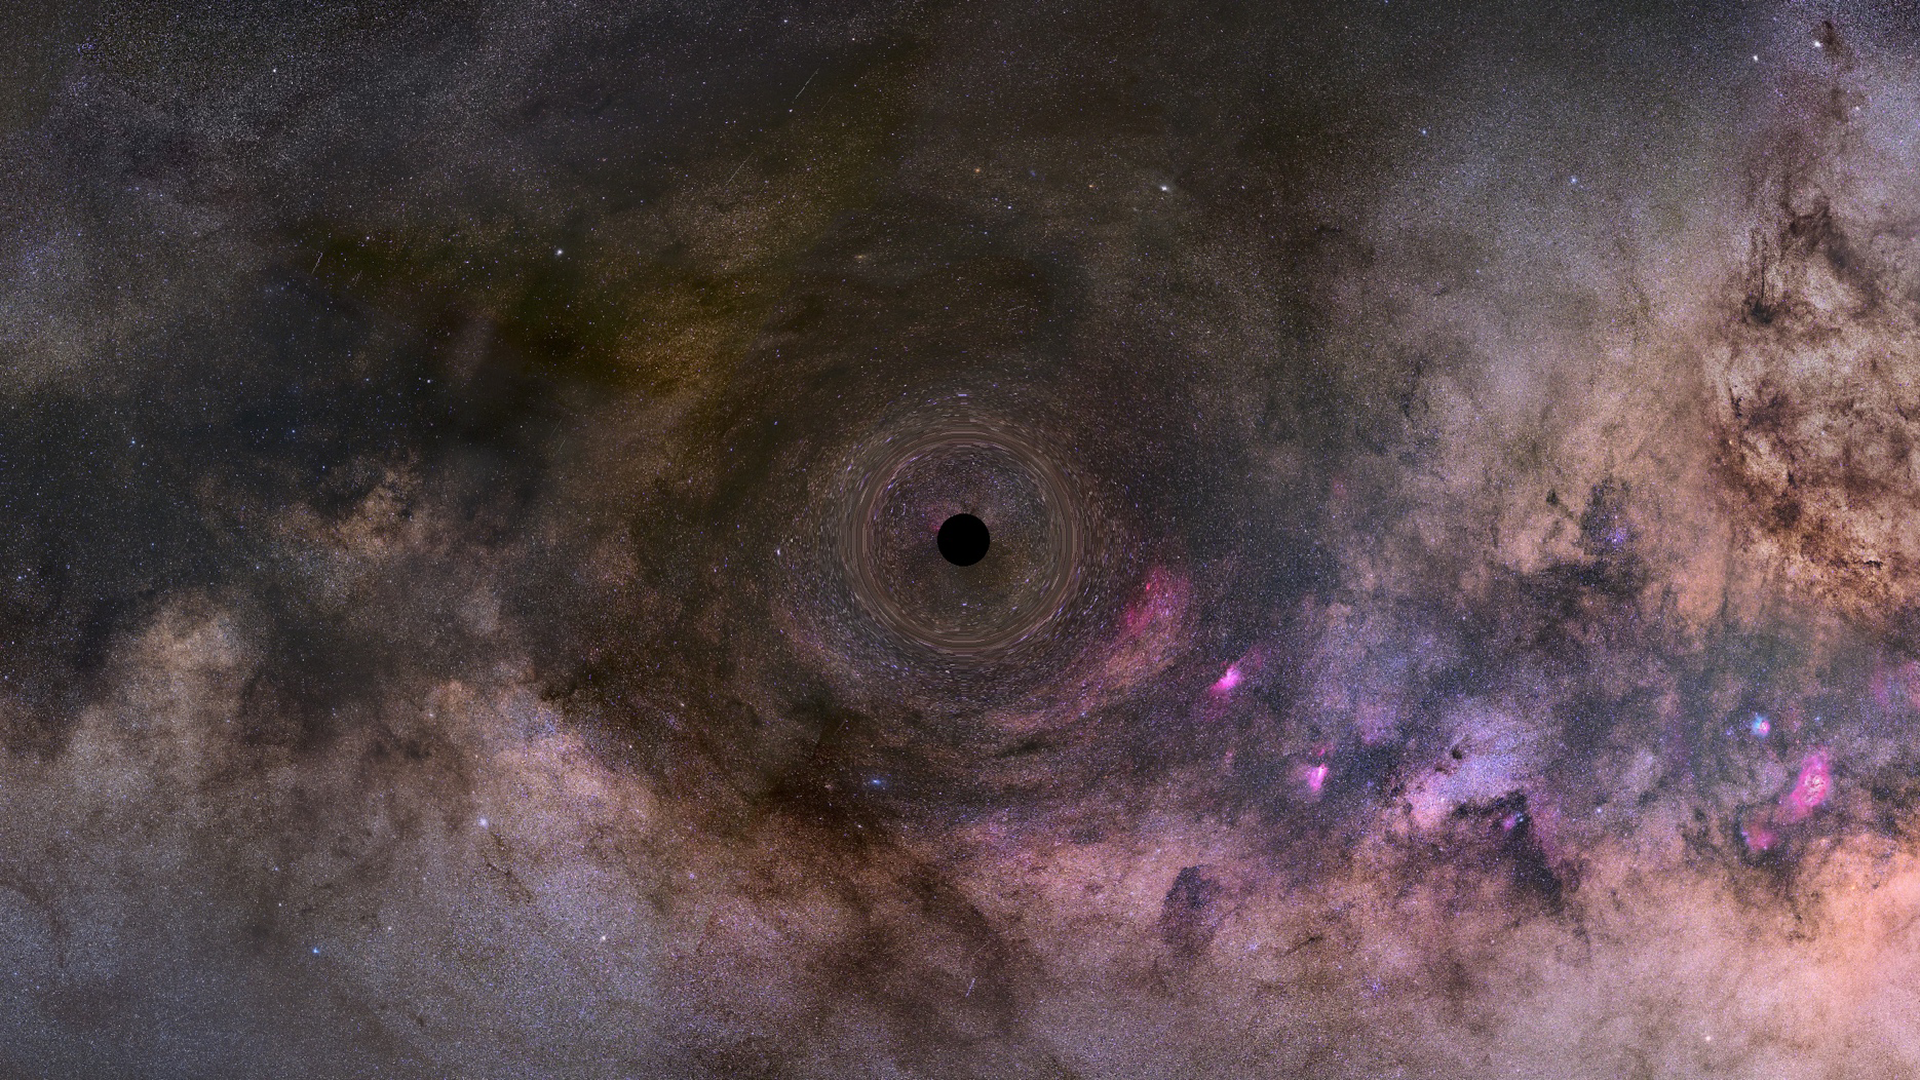 Artist's illustration of a black hole in the Milky Way